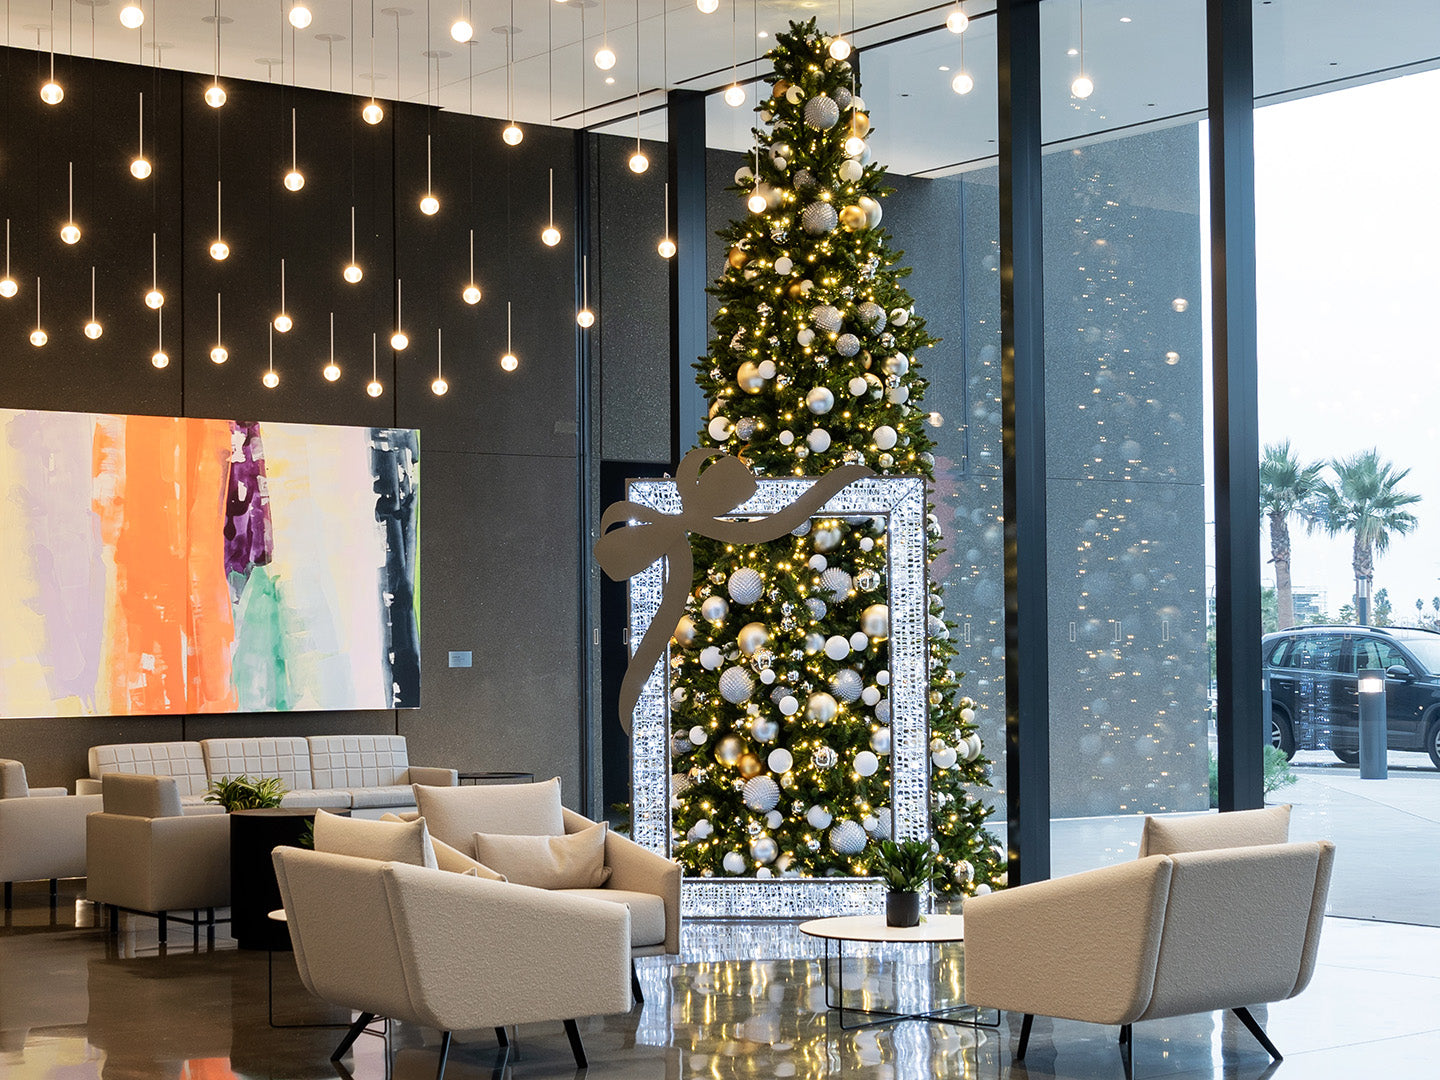 A towering Christmas tree, decorated in silver and gold ornaments, sparkles in front of an illuminated frame.